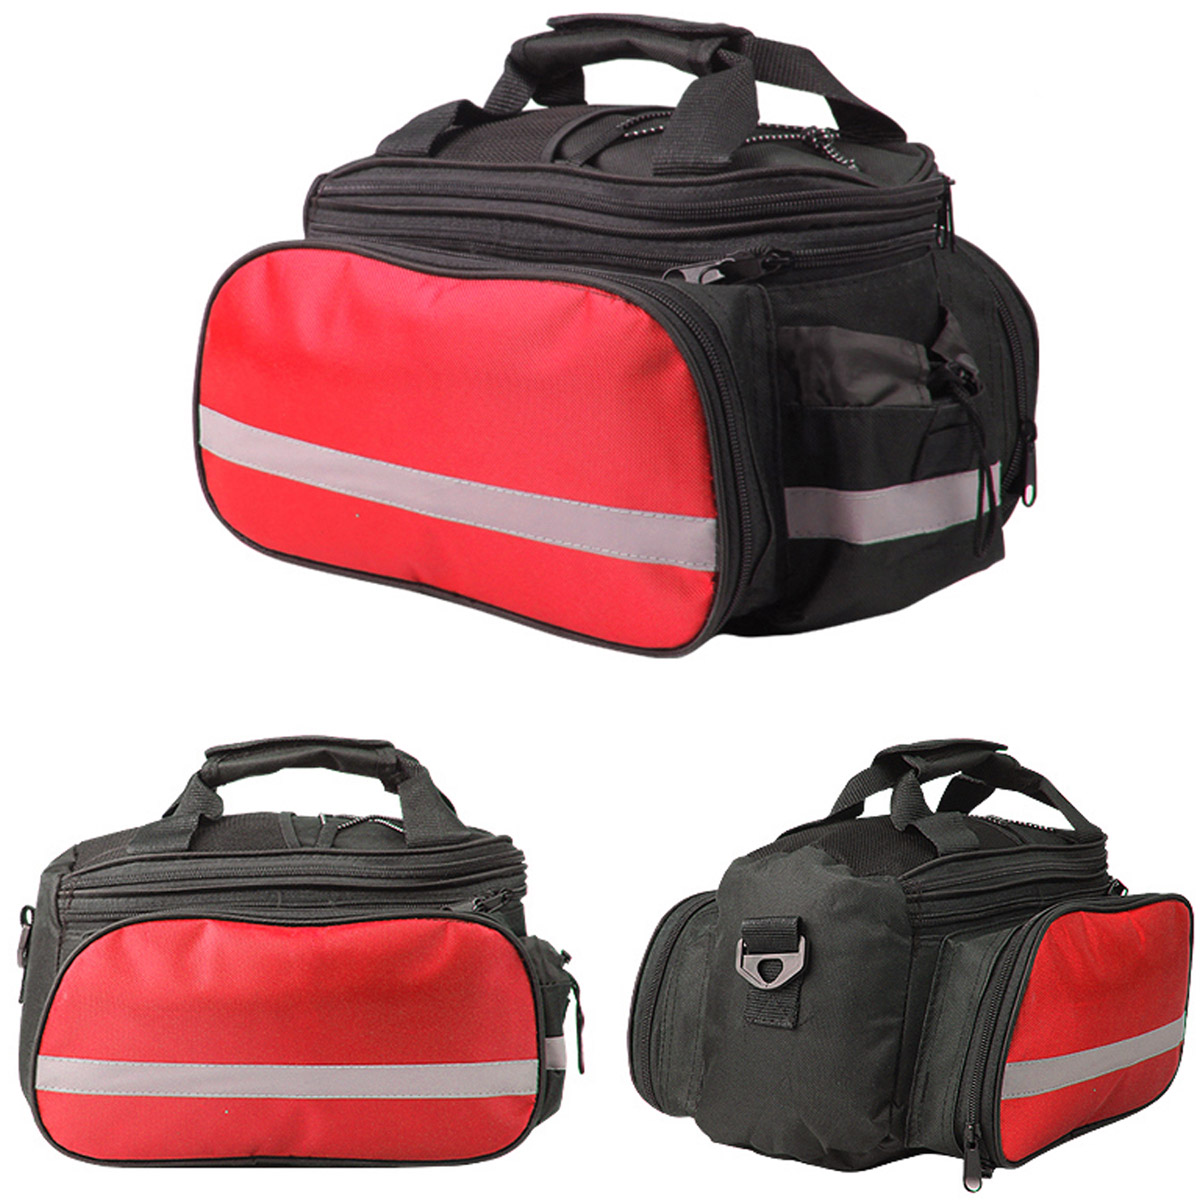 27L-Bicycle-Riding-Package-Large-Capacity-Waterproof-Reflective-Strips-Outdoor-Riding-Bag-1874551-13